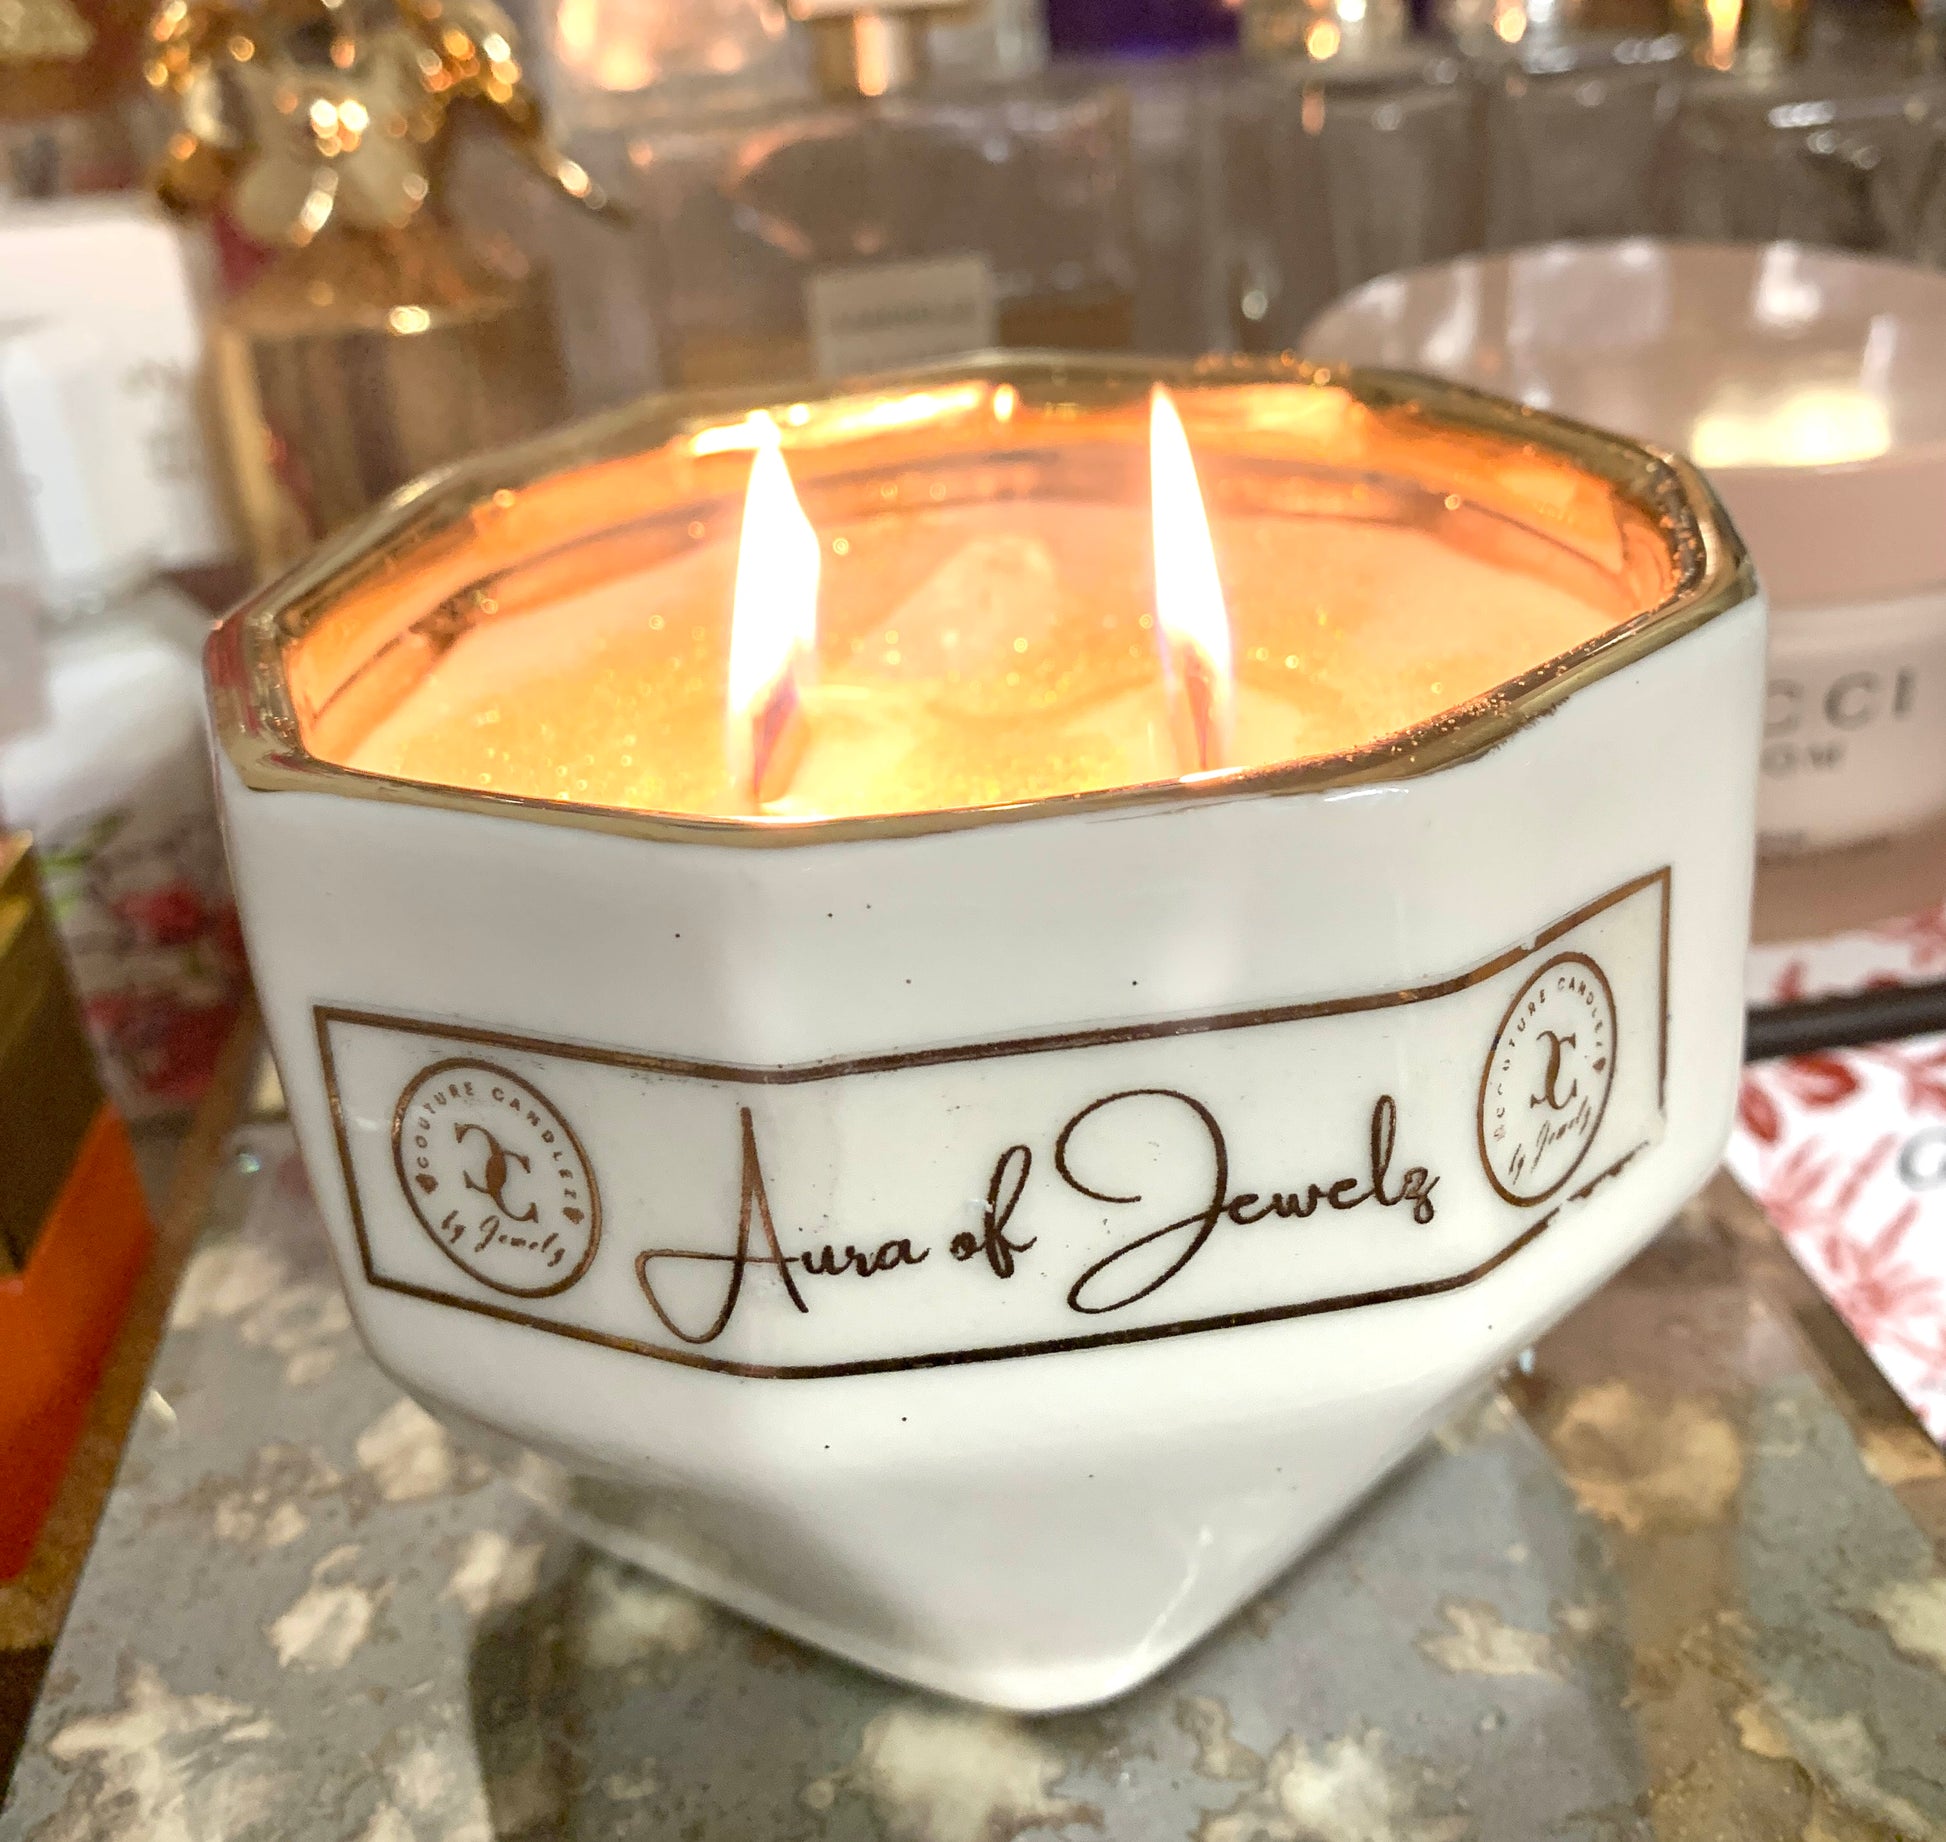 Couture Candlez by Jewelz (Aura of Jewelz) luxury candle - handmade, gold interior, jewel-shaped ceramic bowl with notes of black currant & Bulgarian roses